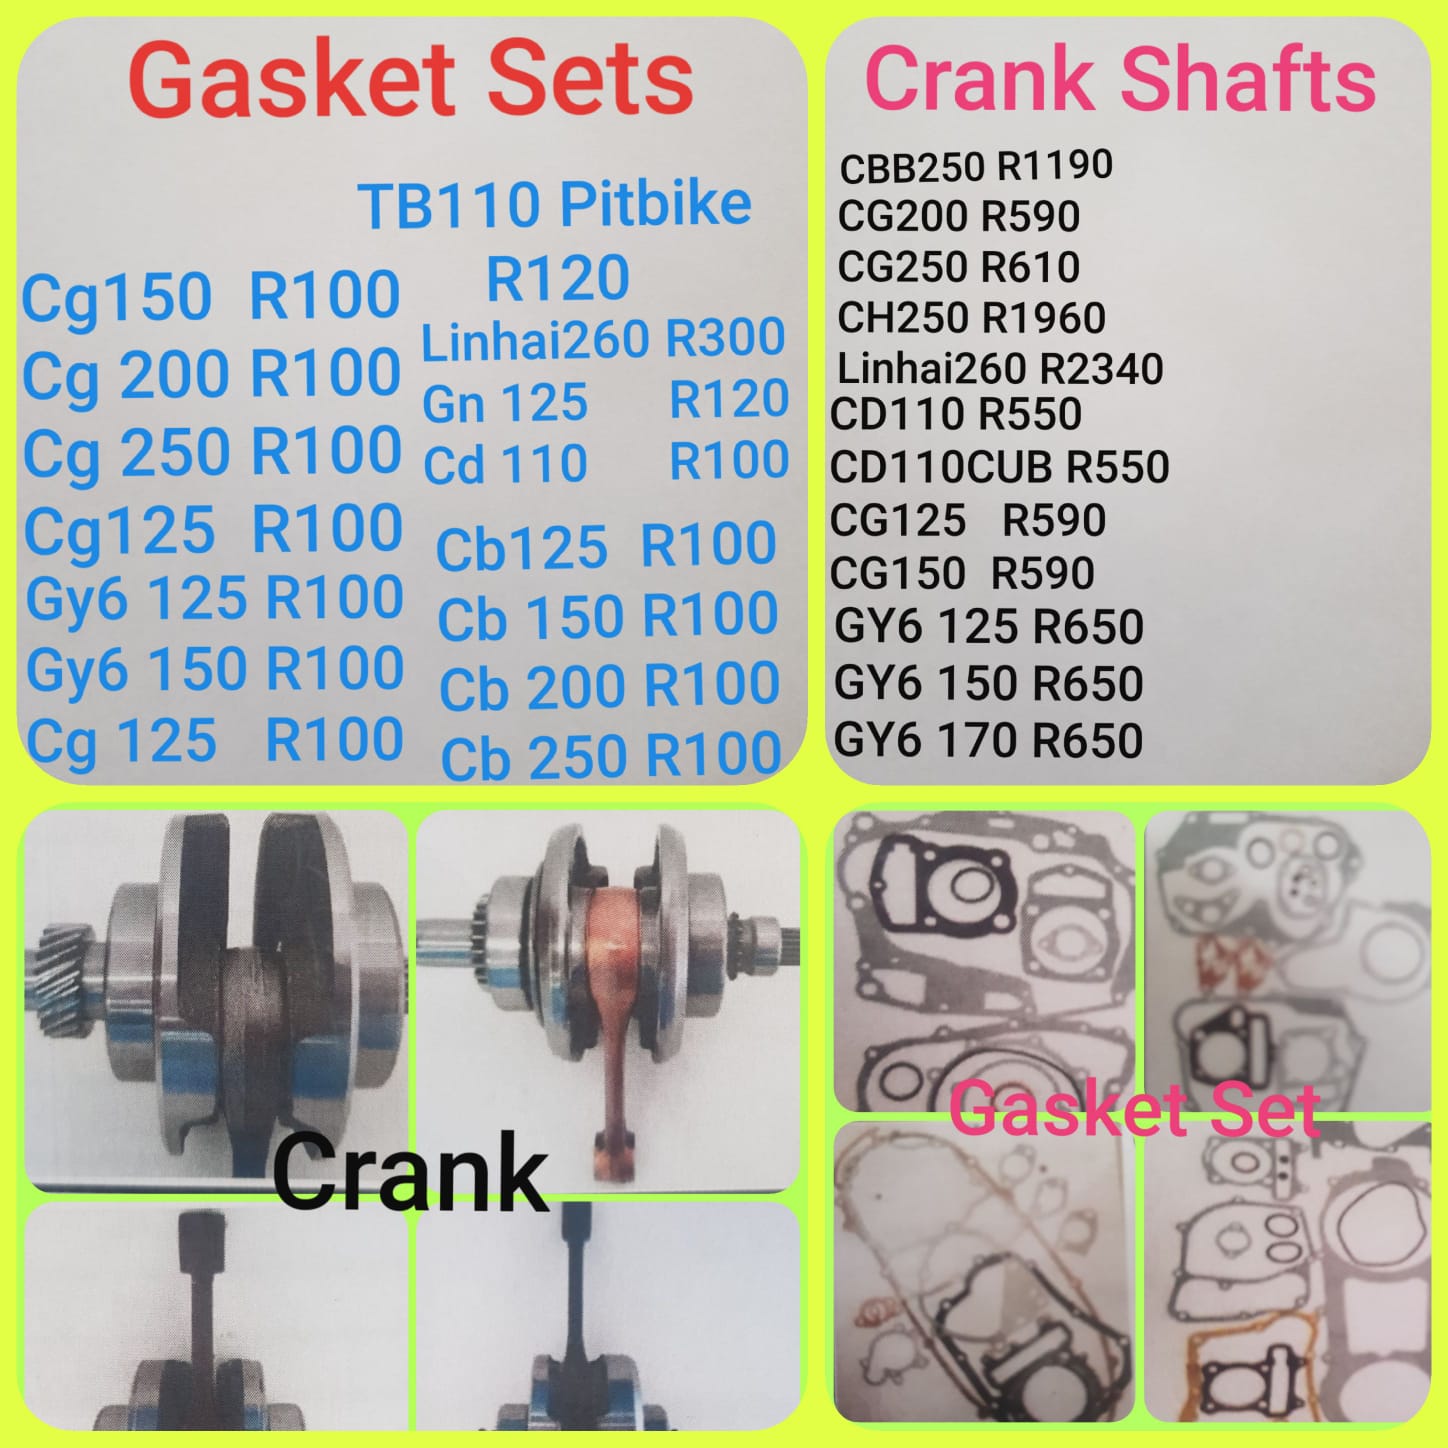 GY6,CG,YBR,GN AND Deliver bikes parts